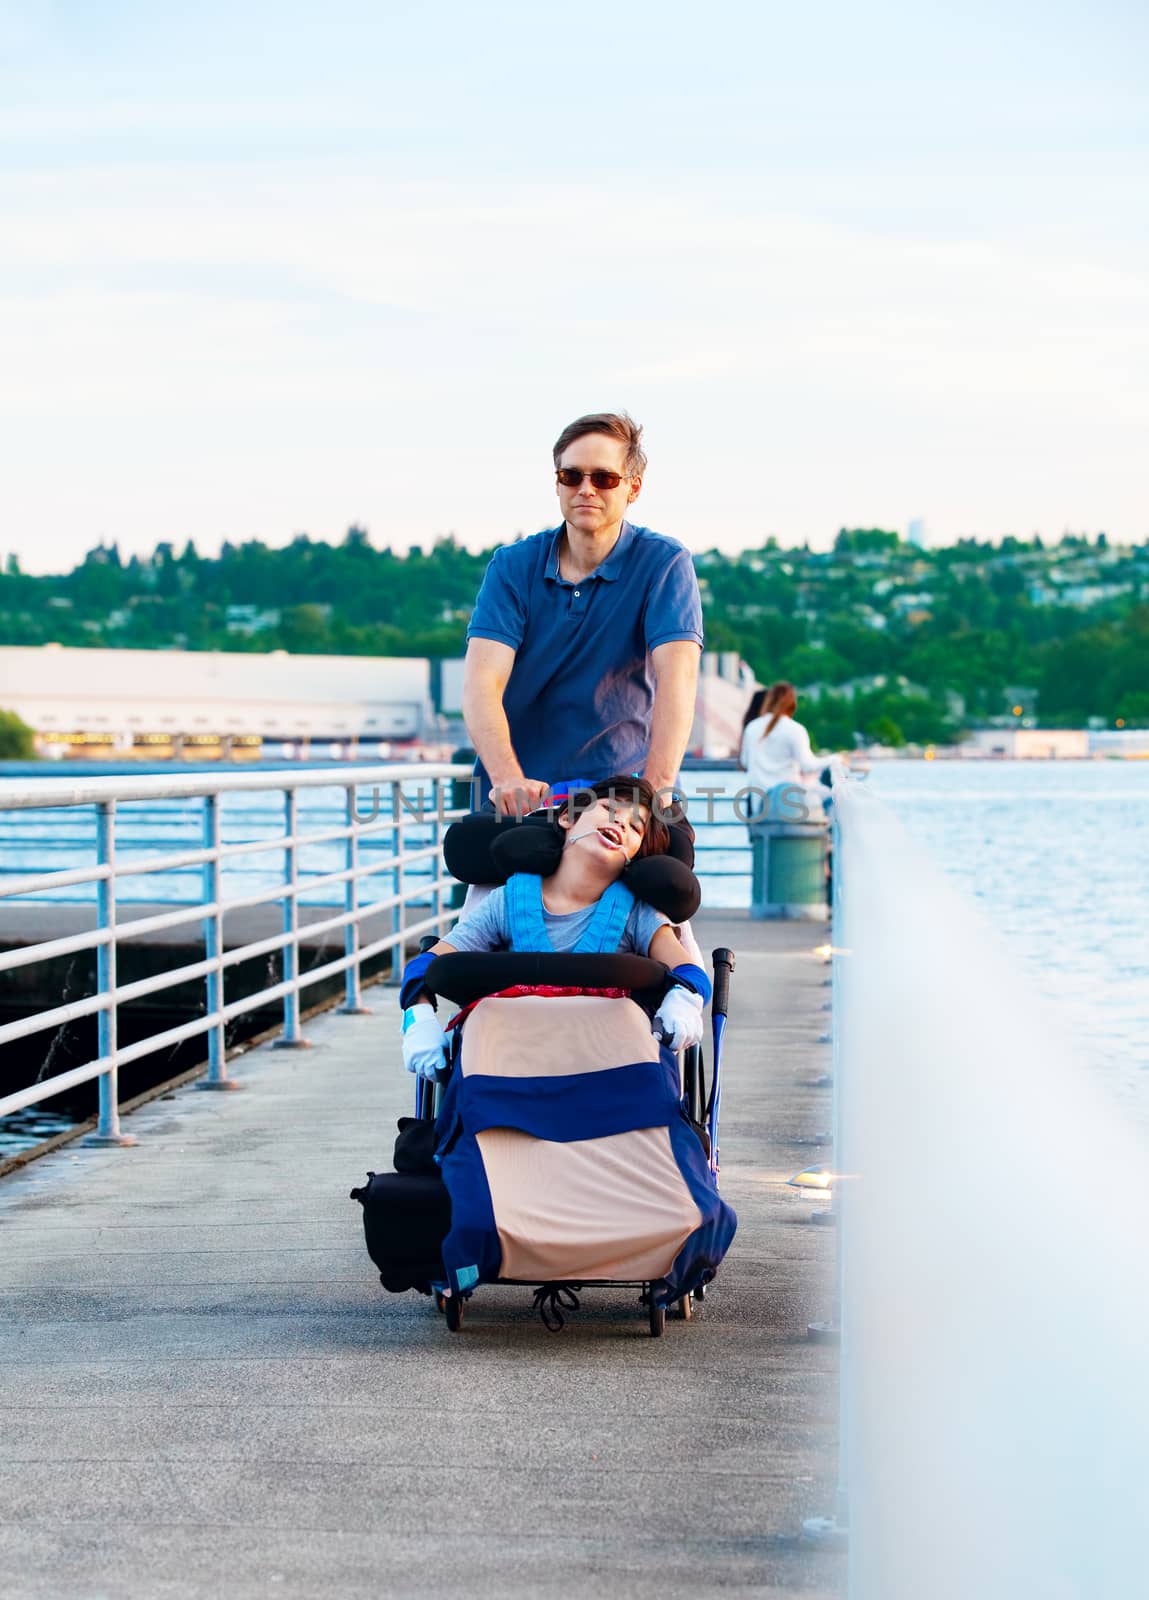 Disabled child in wheelchair outdoors by lake with family by jarenwicklund